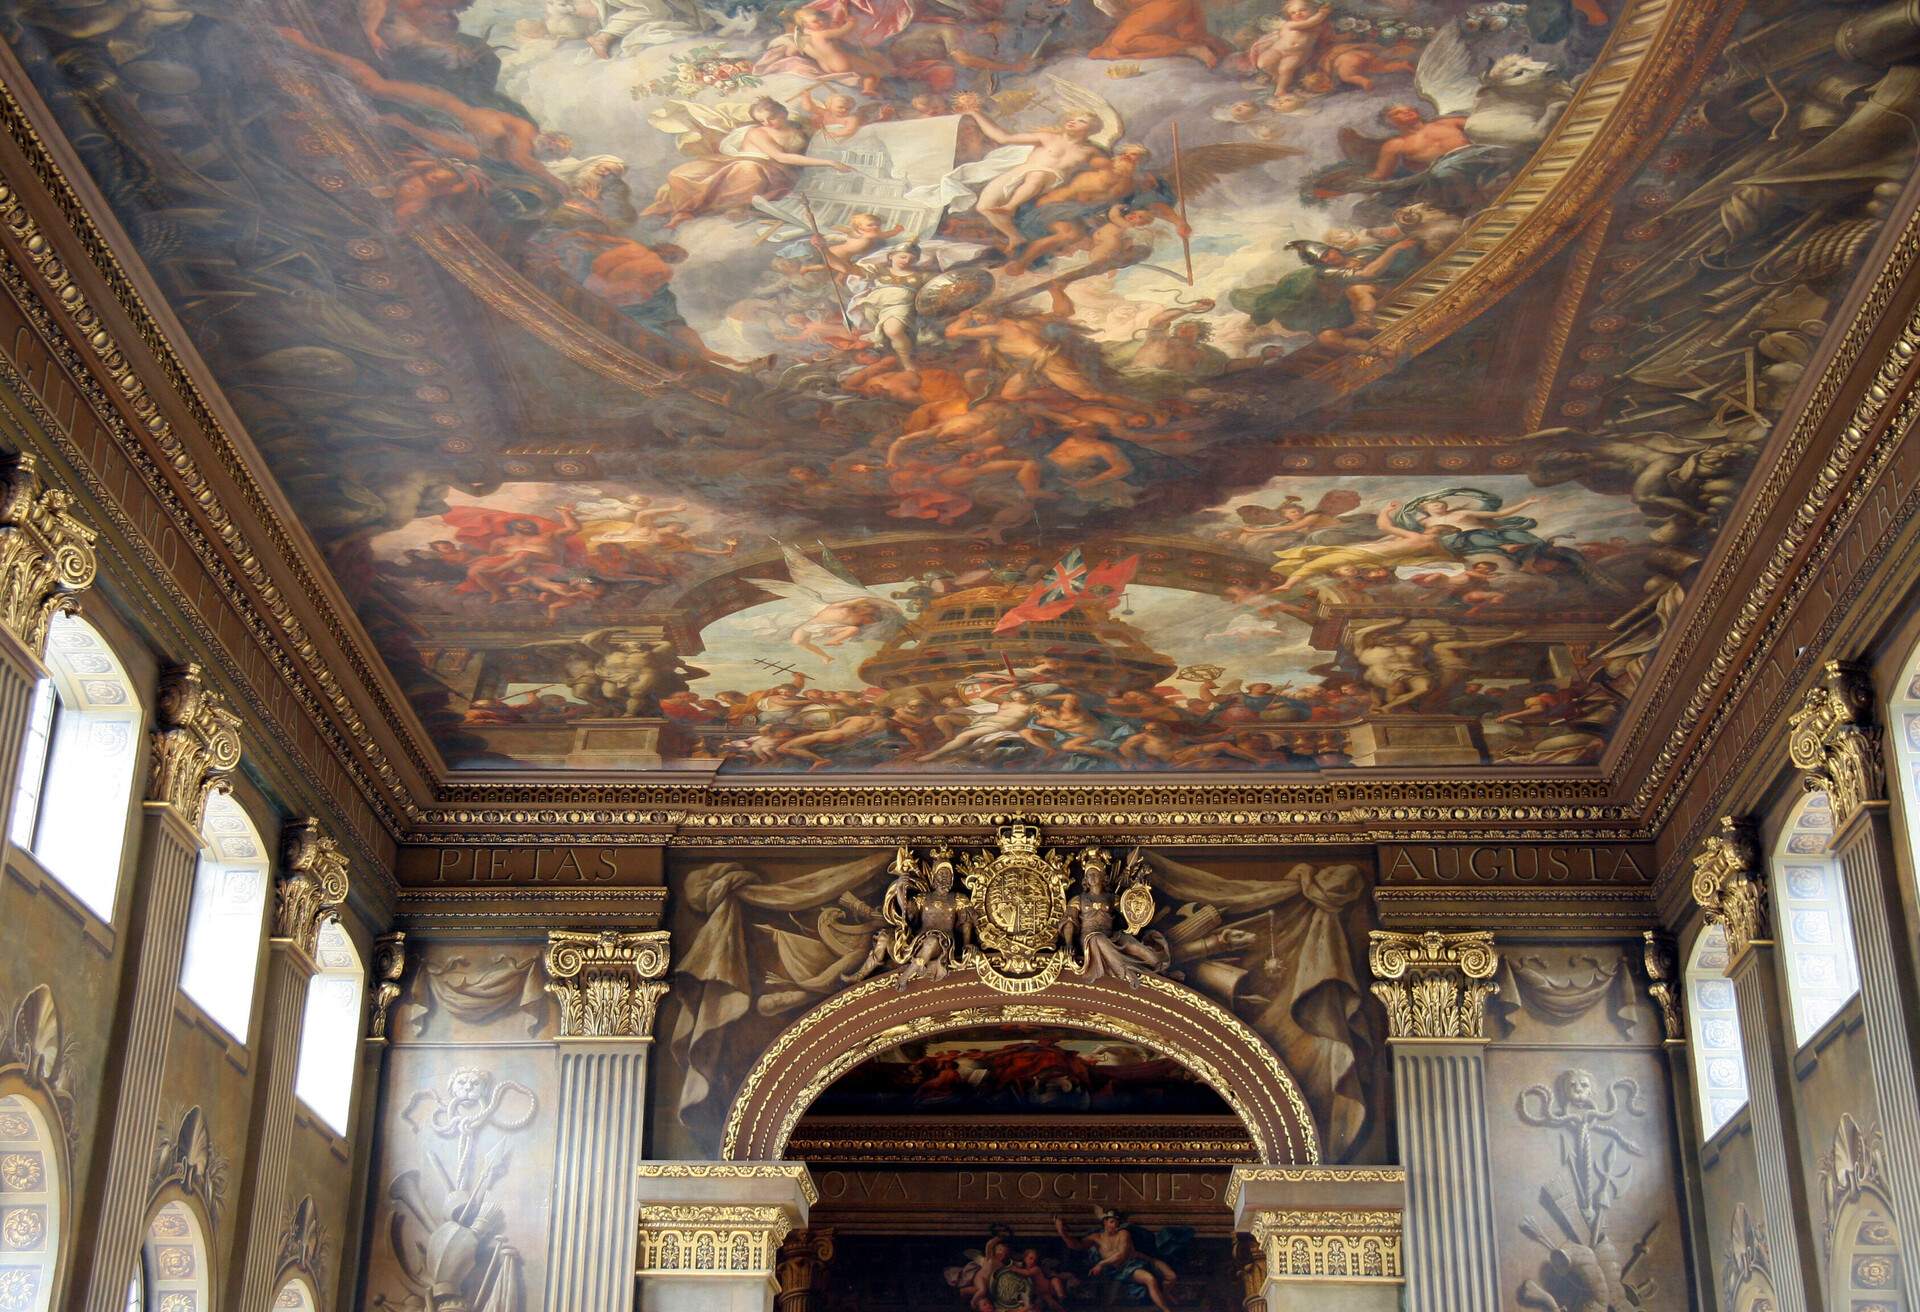 Magnificent baroque ceiling at the Royal Naval College, Greenwich,